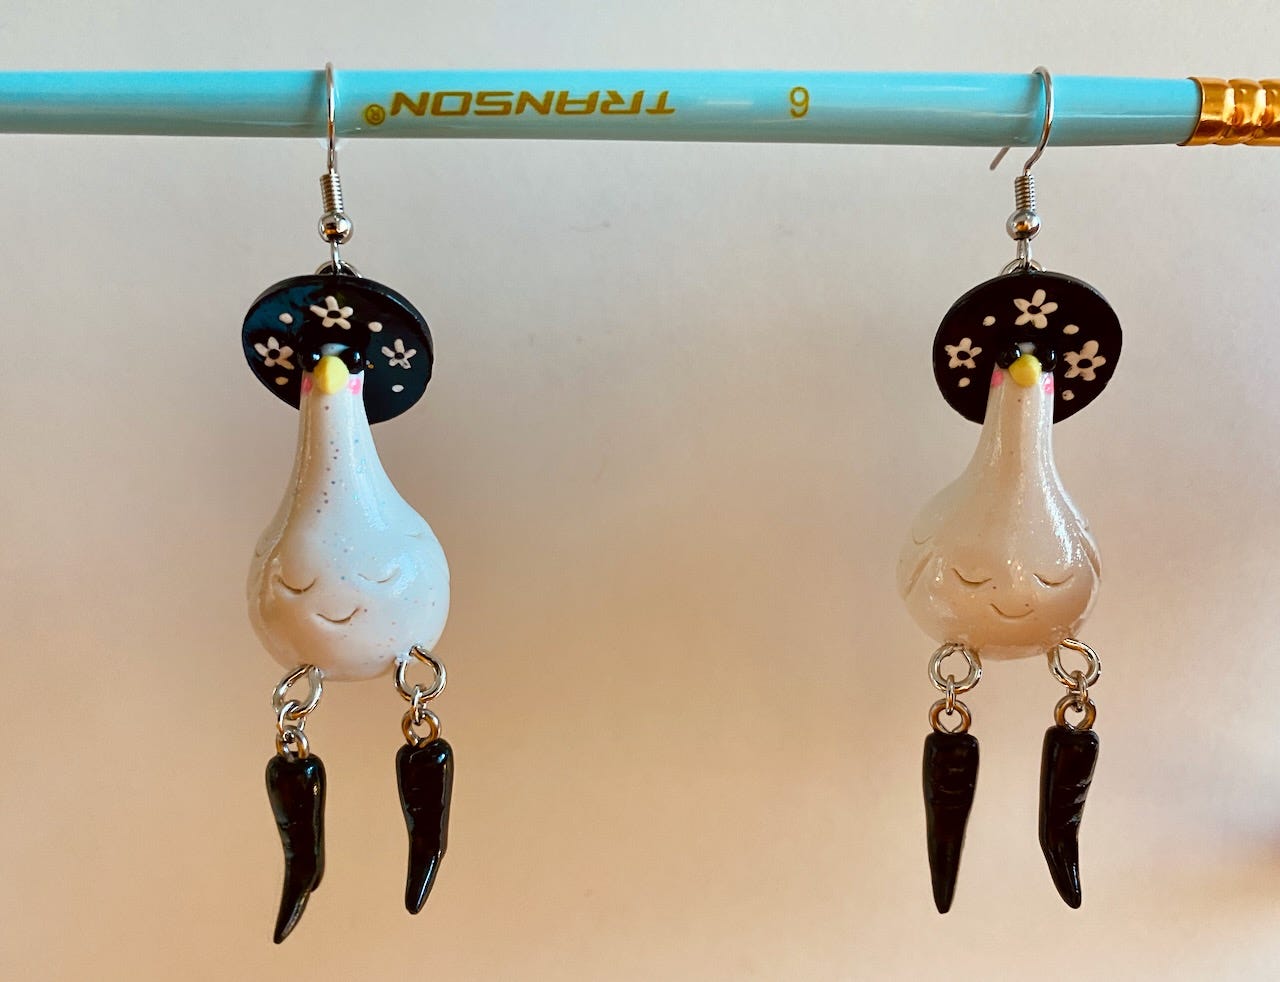 A pair of earrings hanging like fruit from a paintbrush branch. The earrings are glittery polymer clay geese wearing floral witch hats, sunglasses, and kicky black boots.